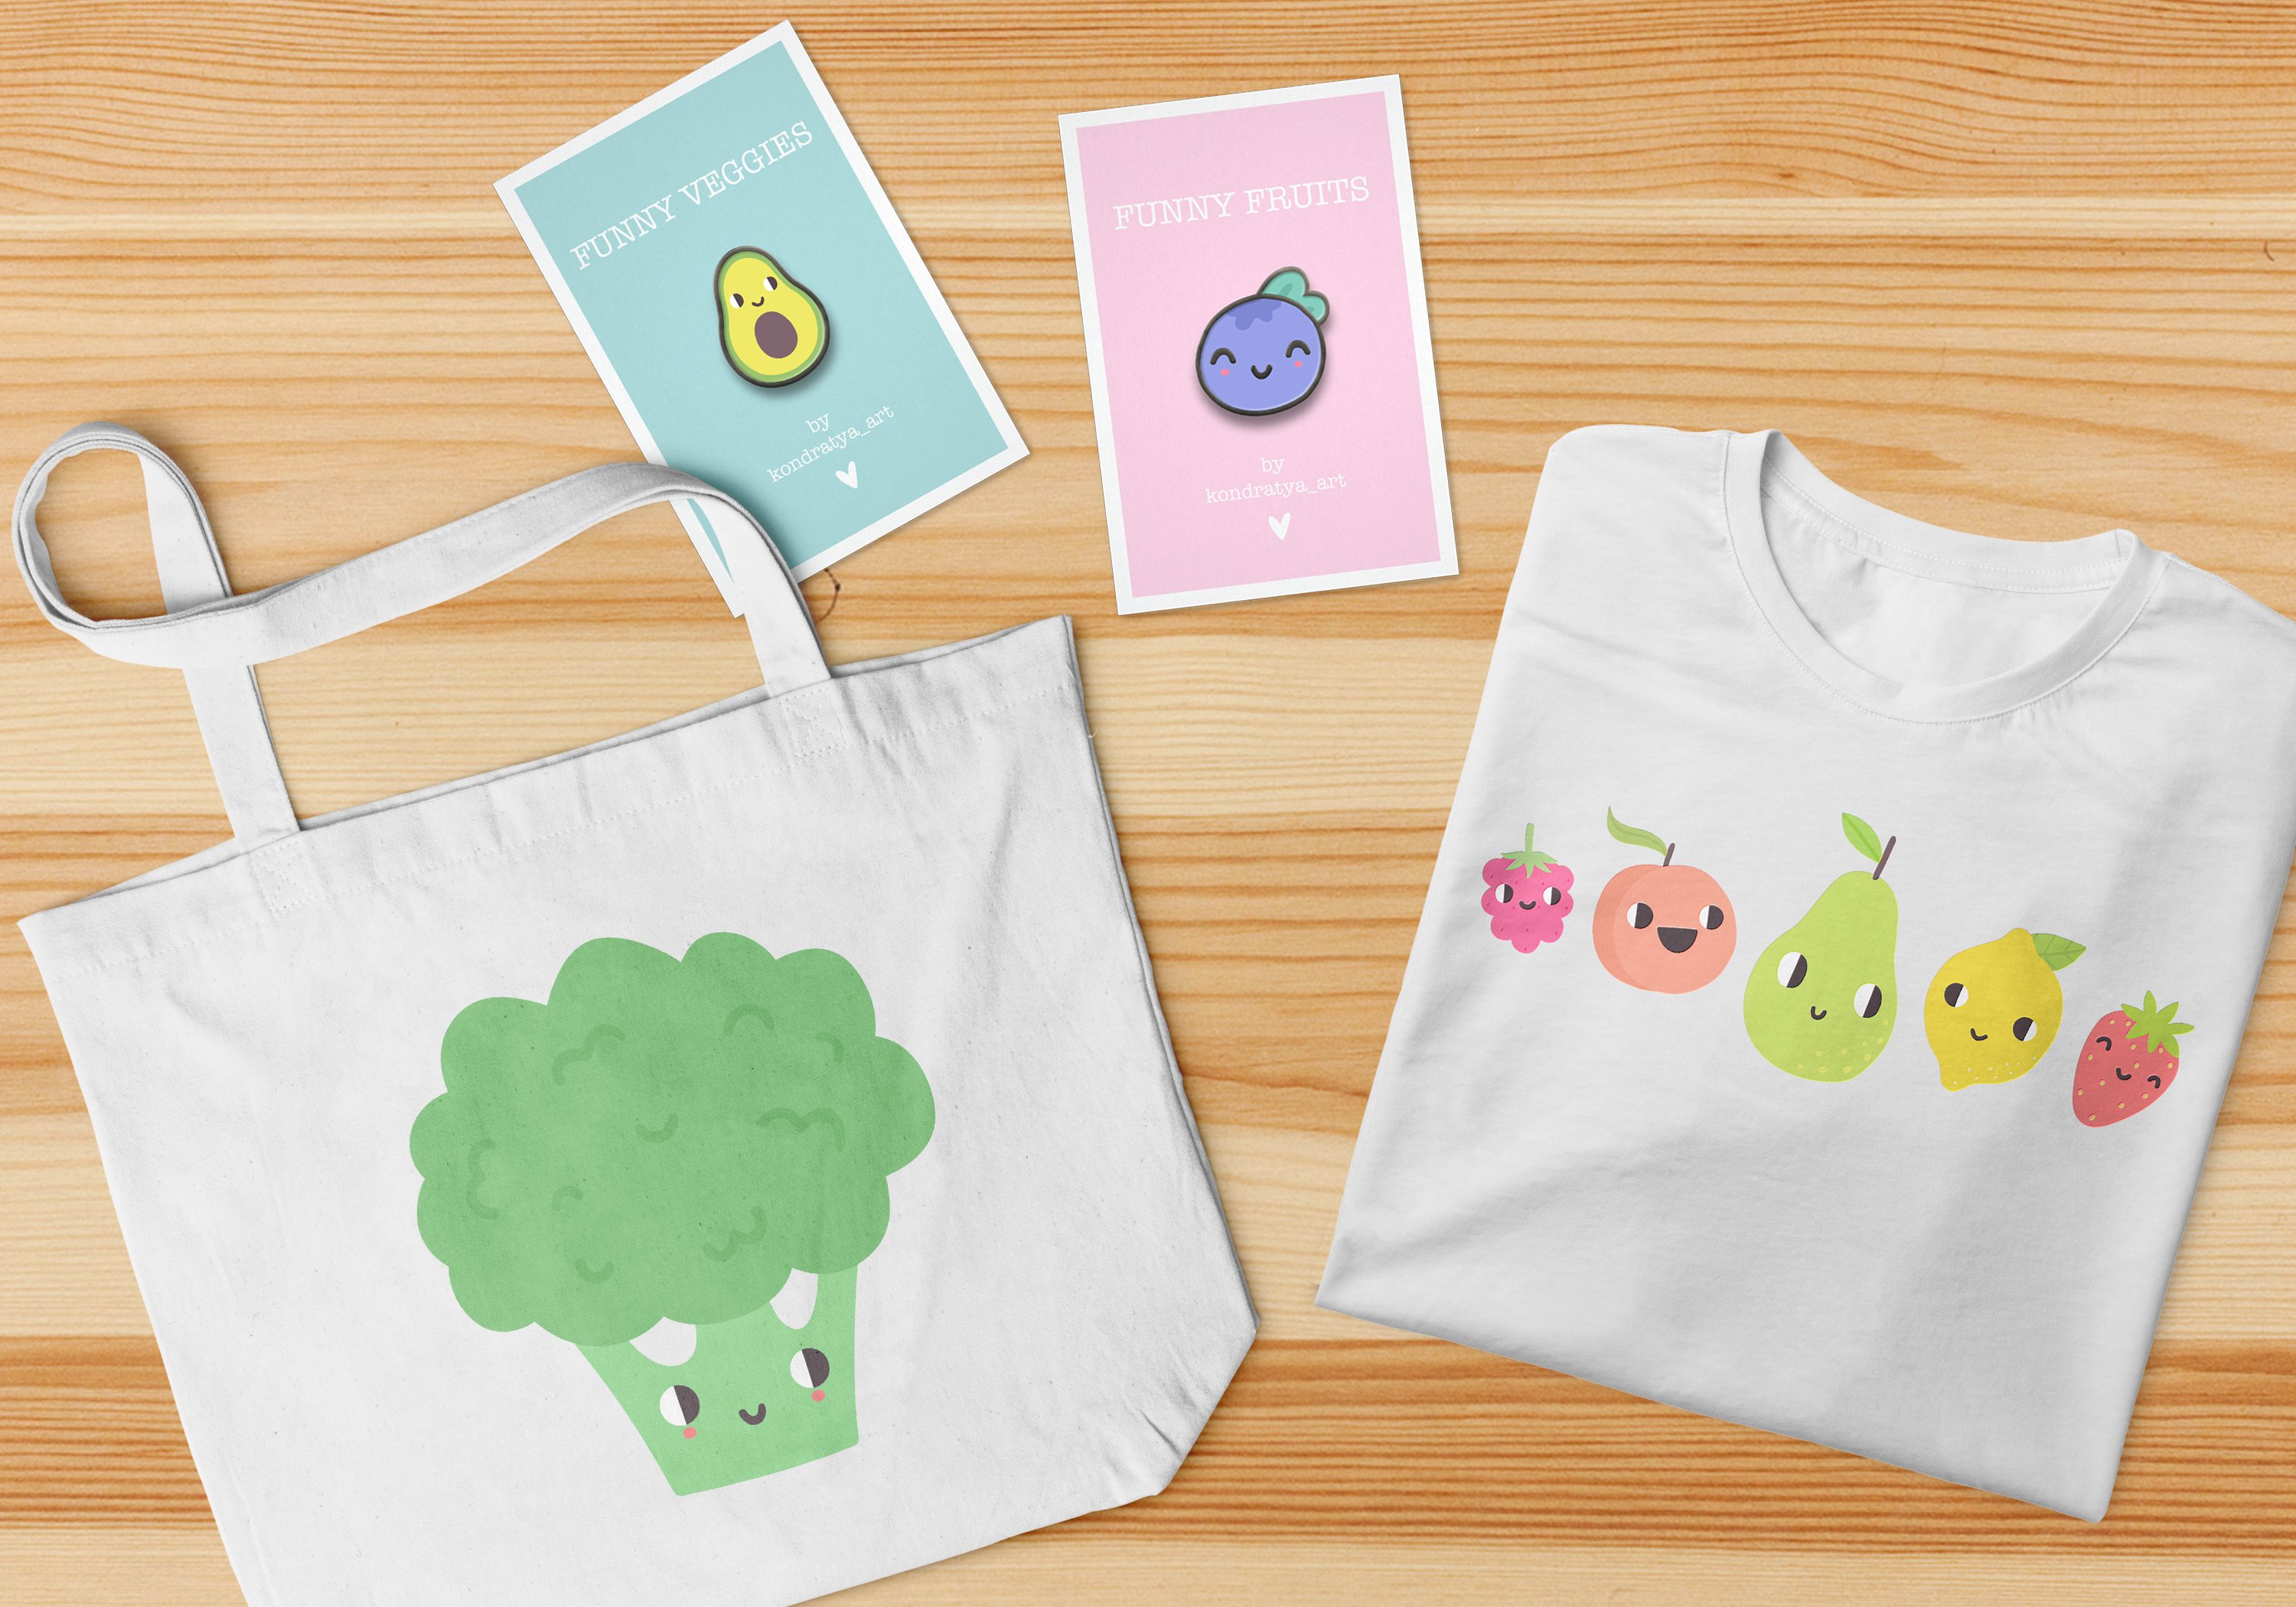 Funny fruits & veggies preview image.